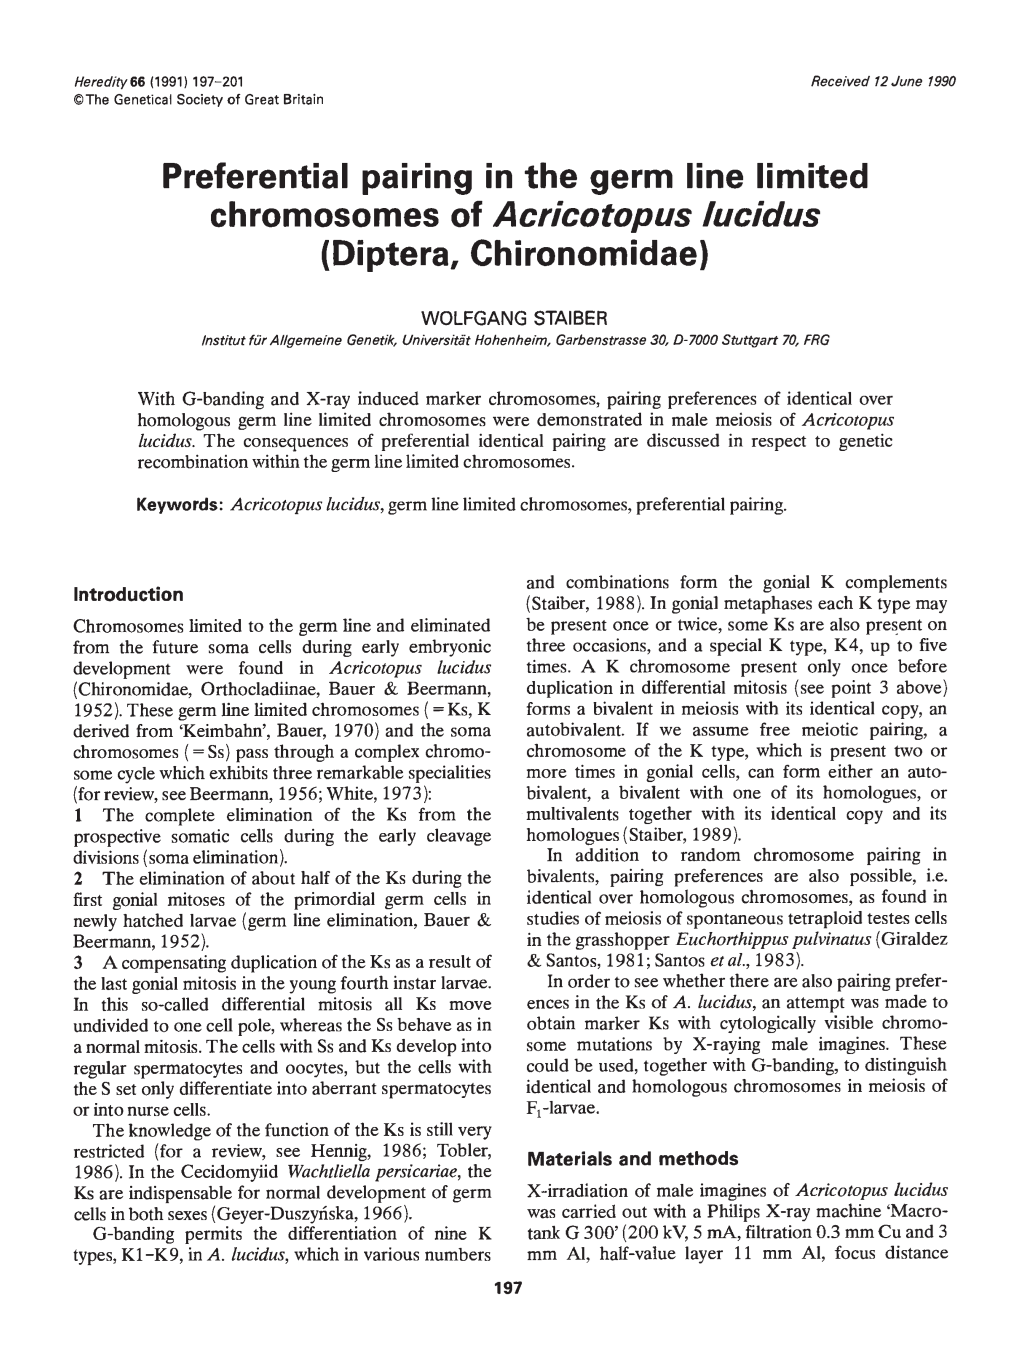 Preferential Pairing in the Germ Line Limited Chromosomes of Acricotopus Lucidus (Diptera, Chironomidae)